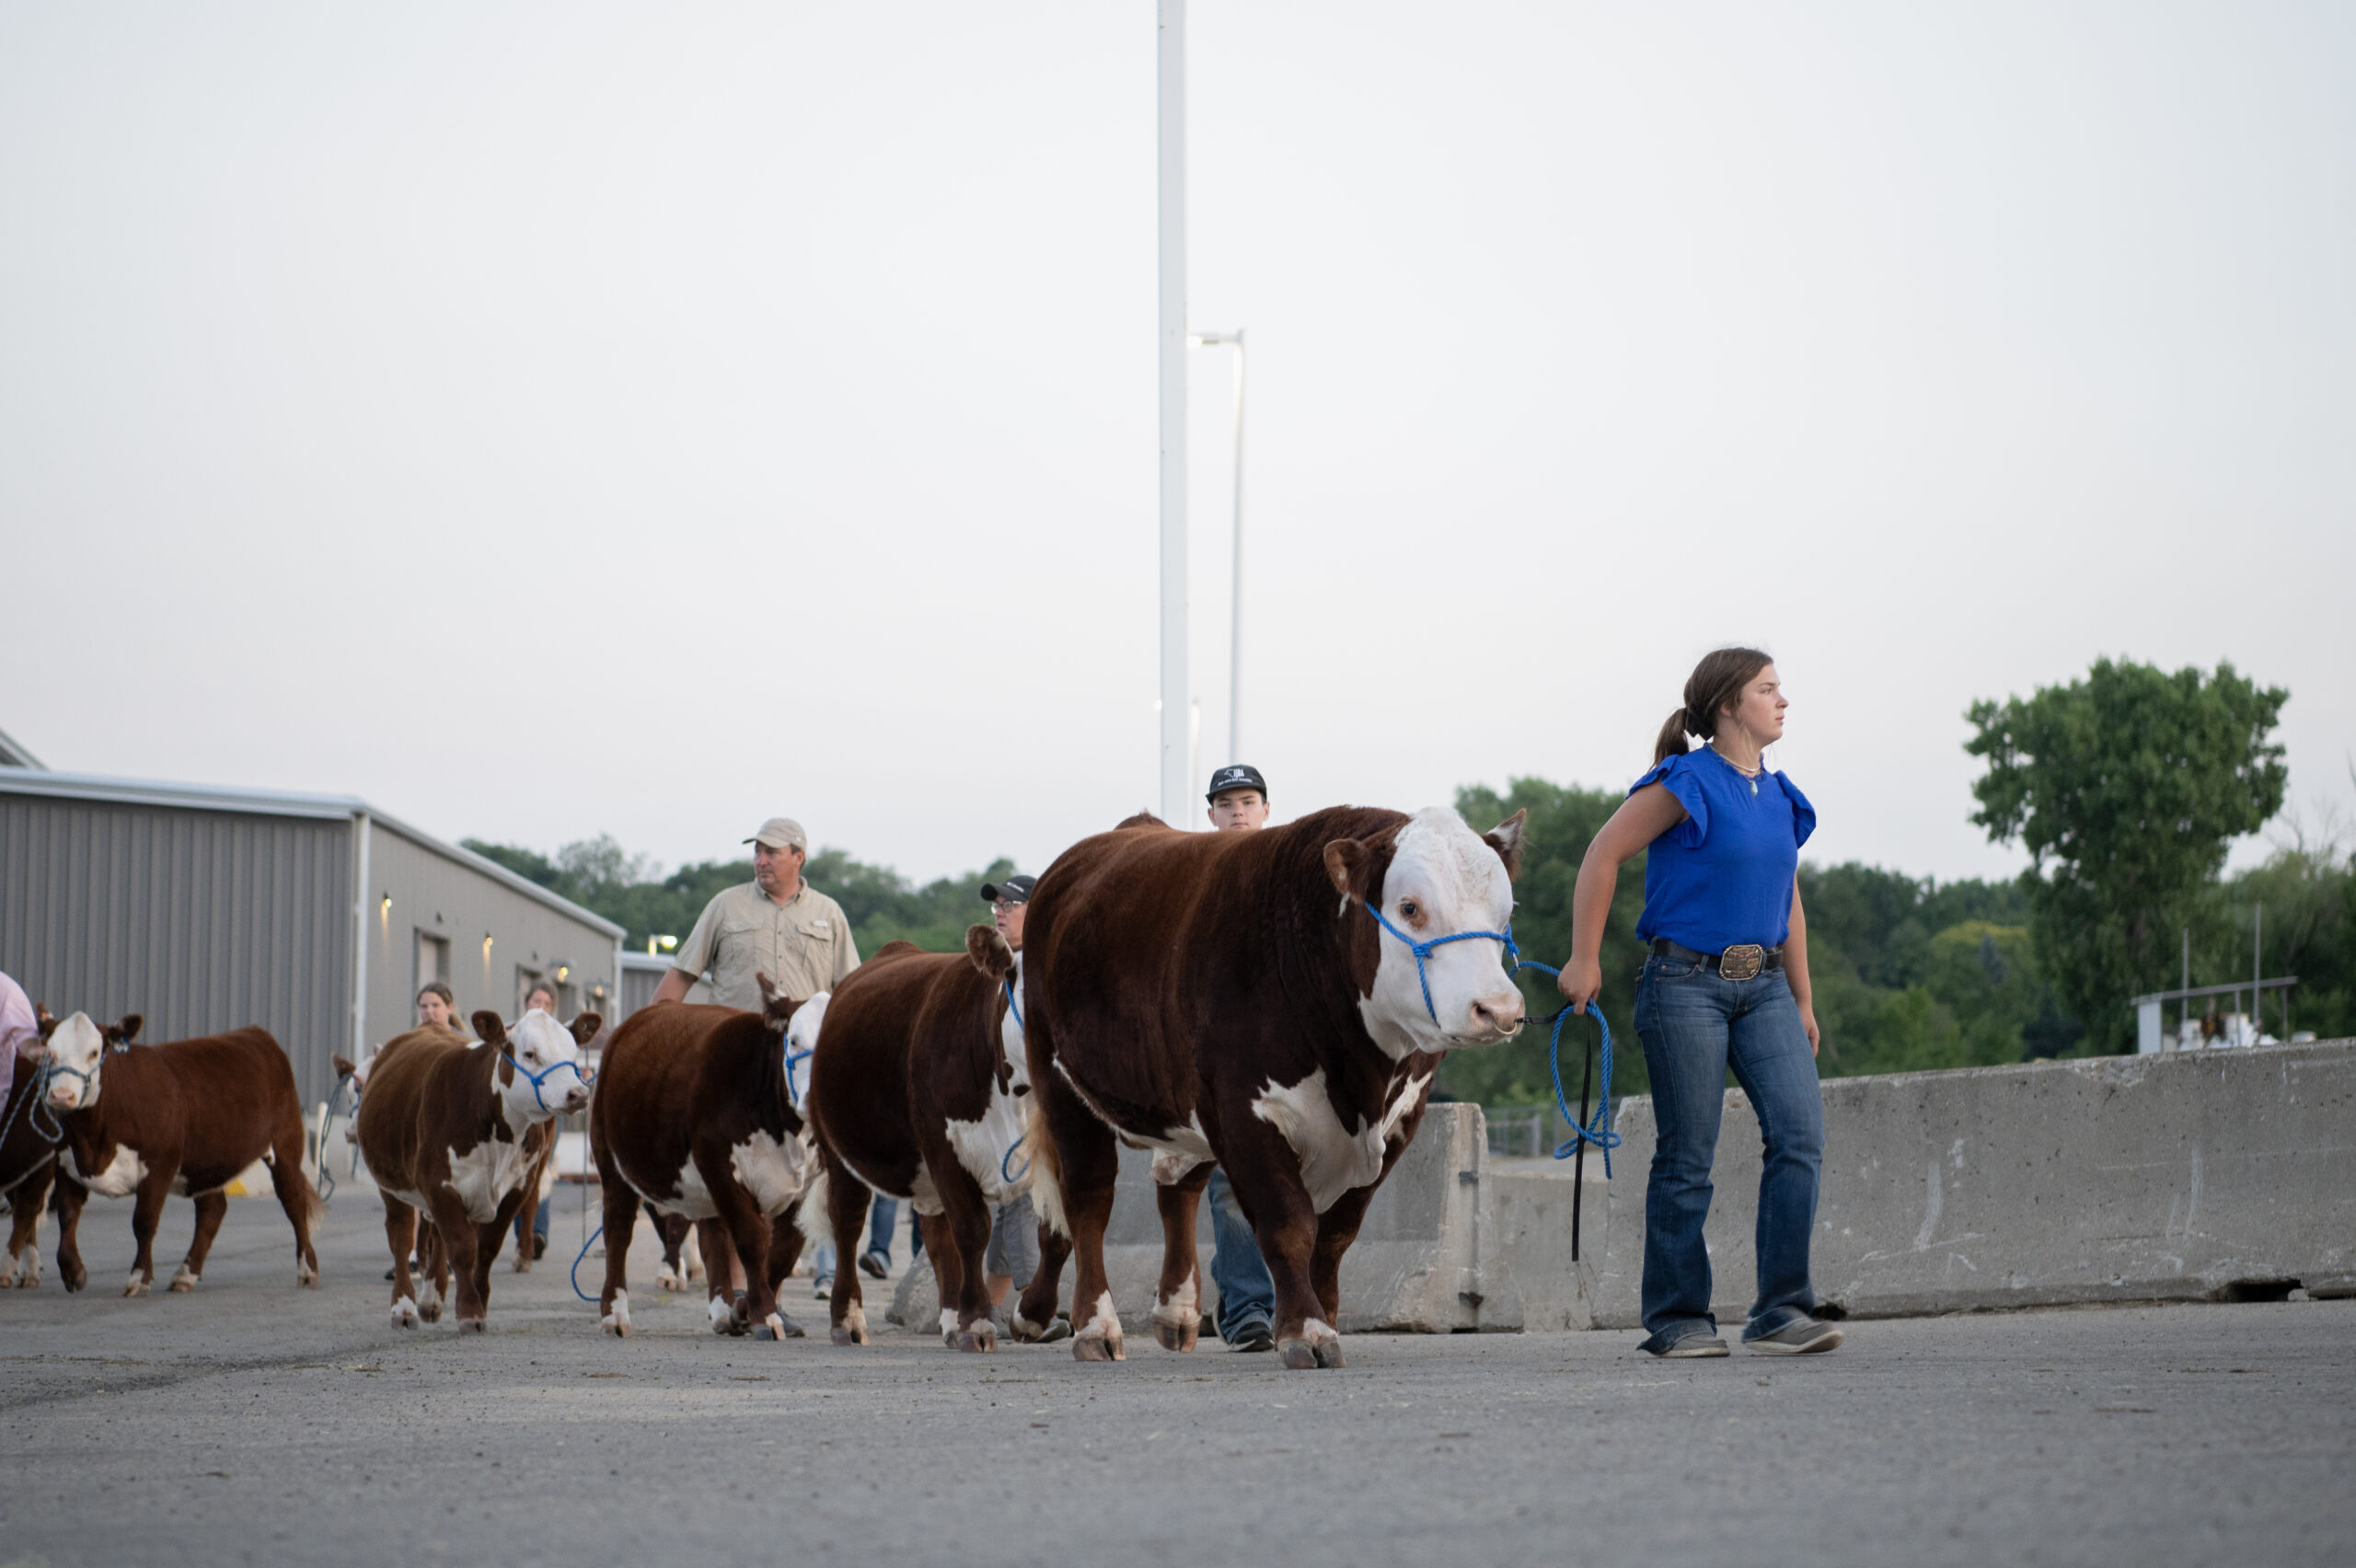 A woman is leading a group of cows for a state association's event.